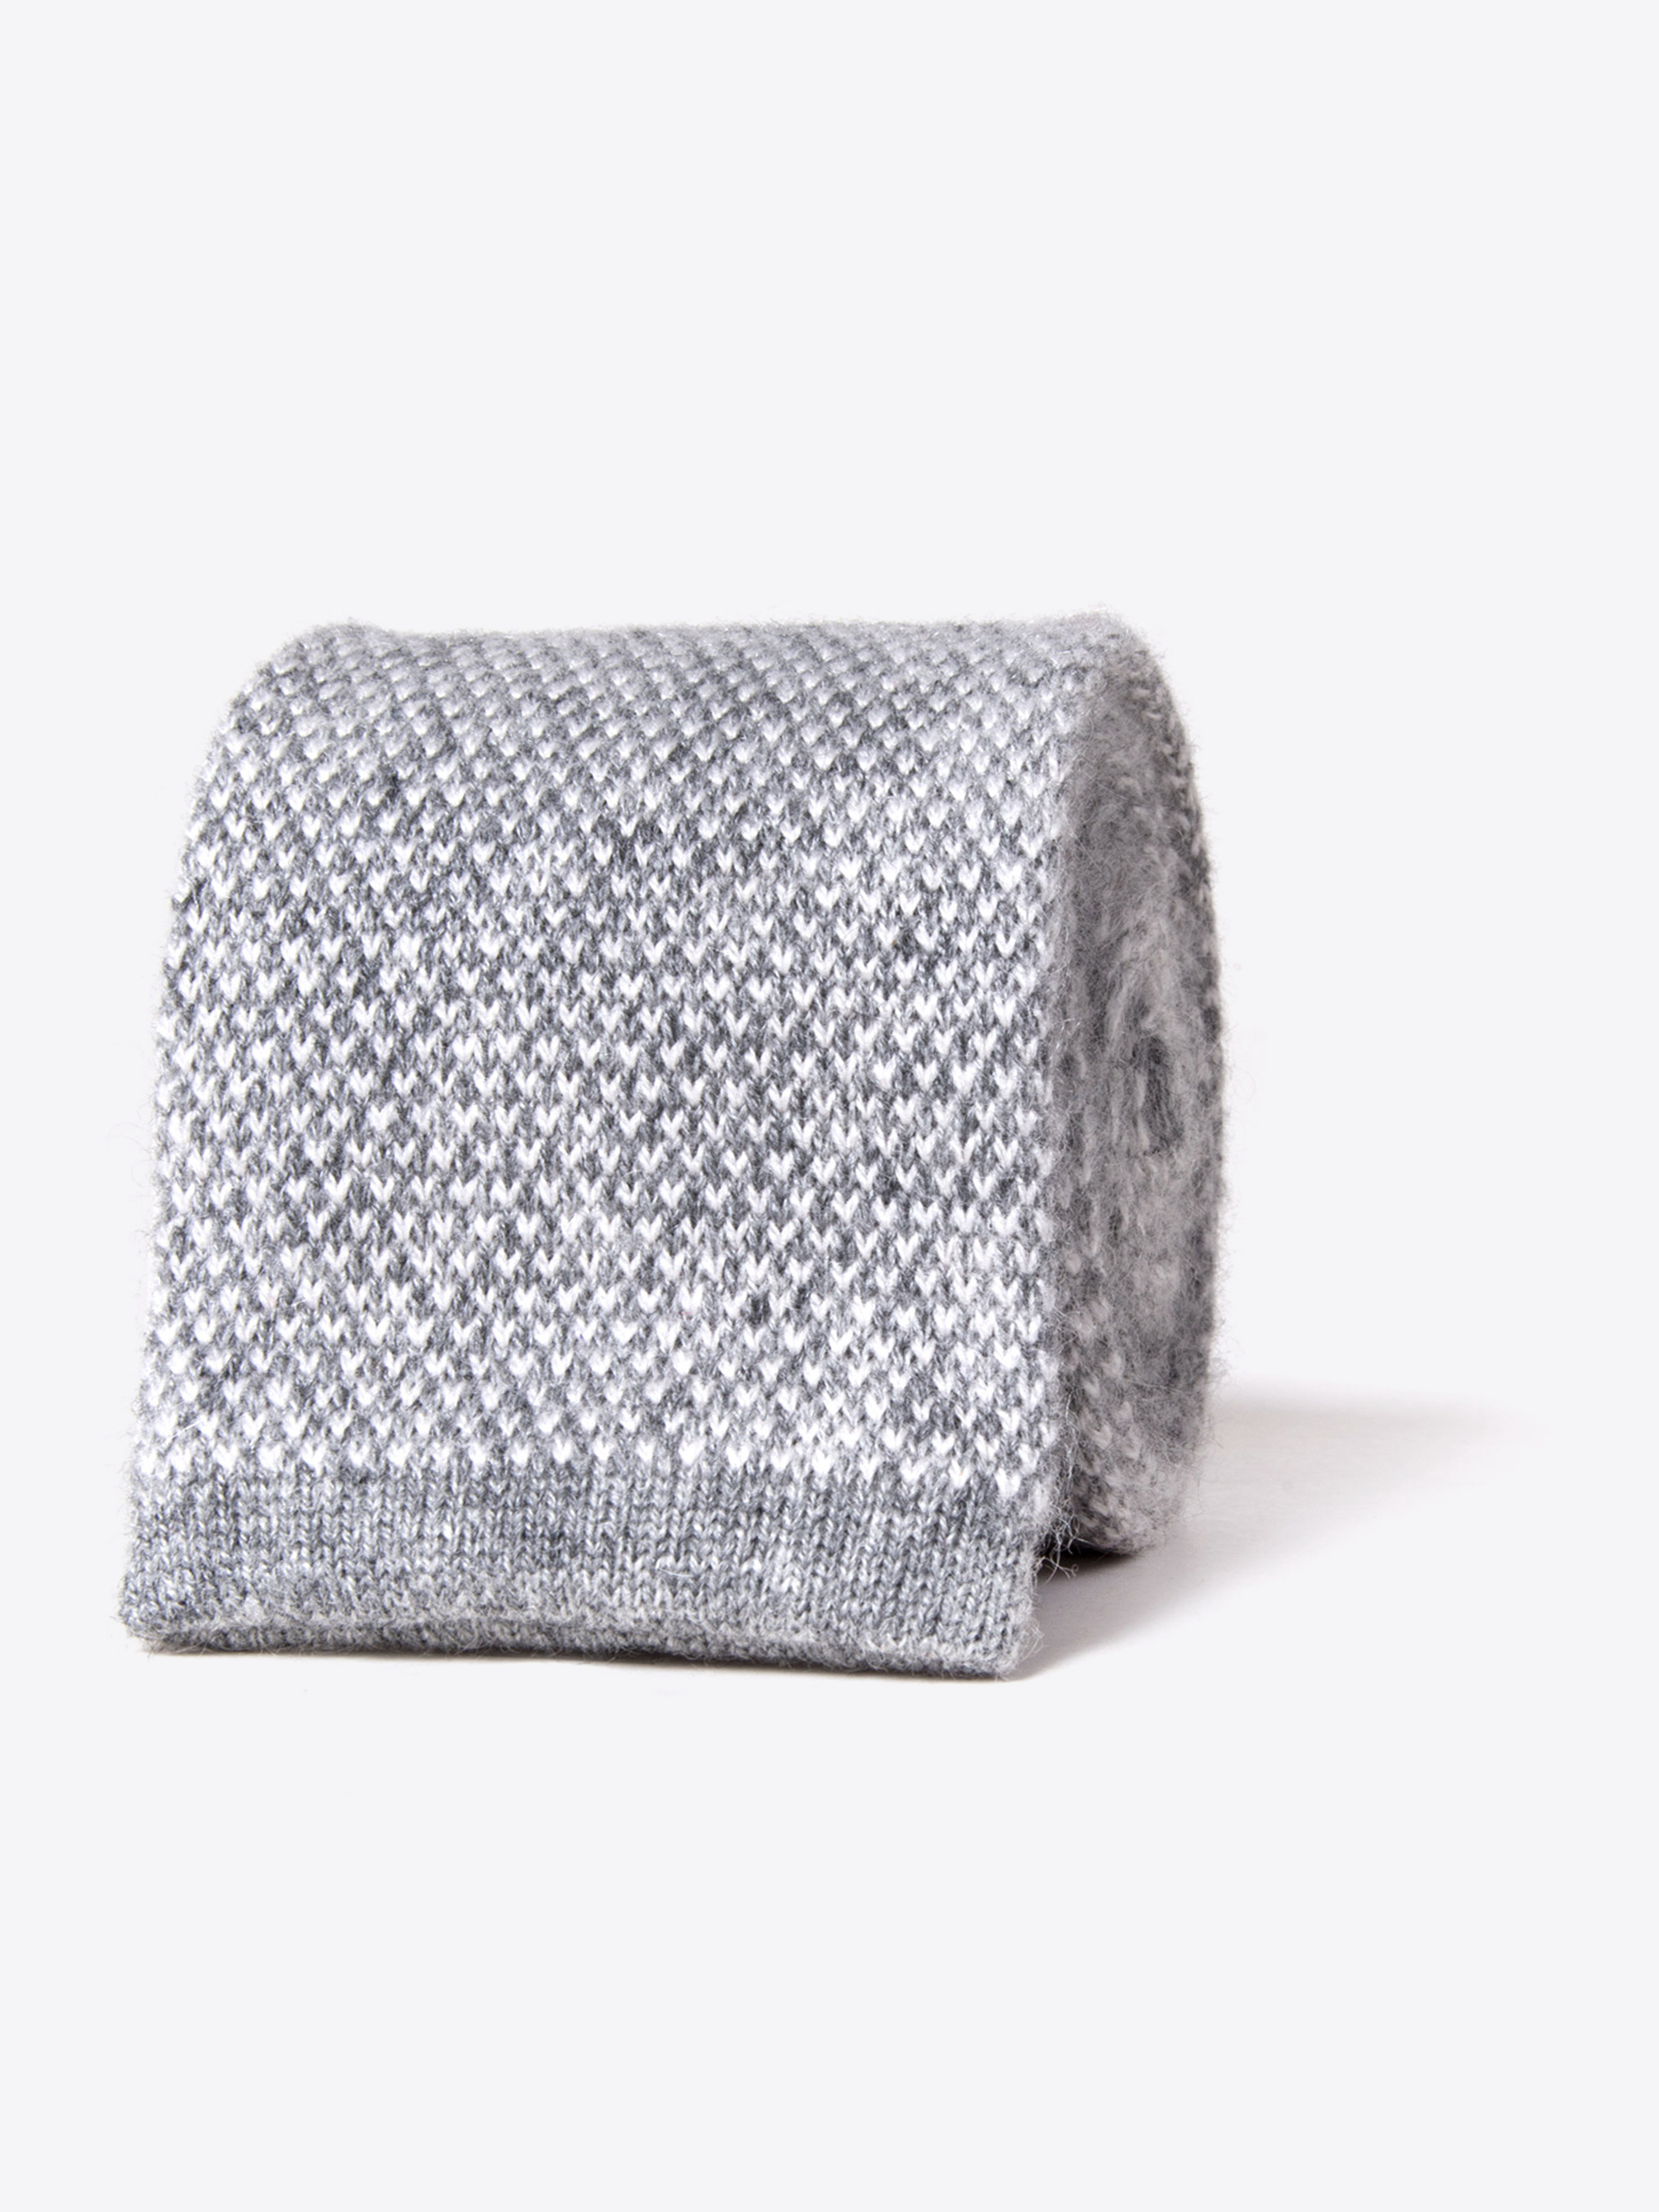 Zoom Image of Torino Grey Cashmere Knit Tie